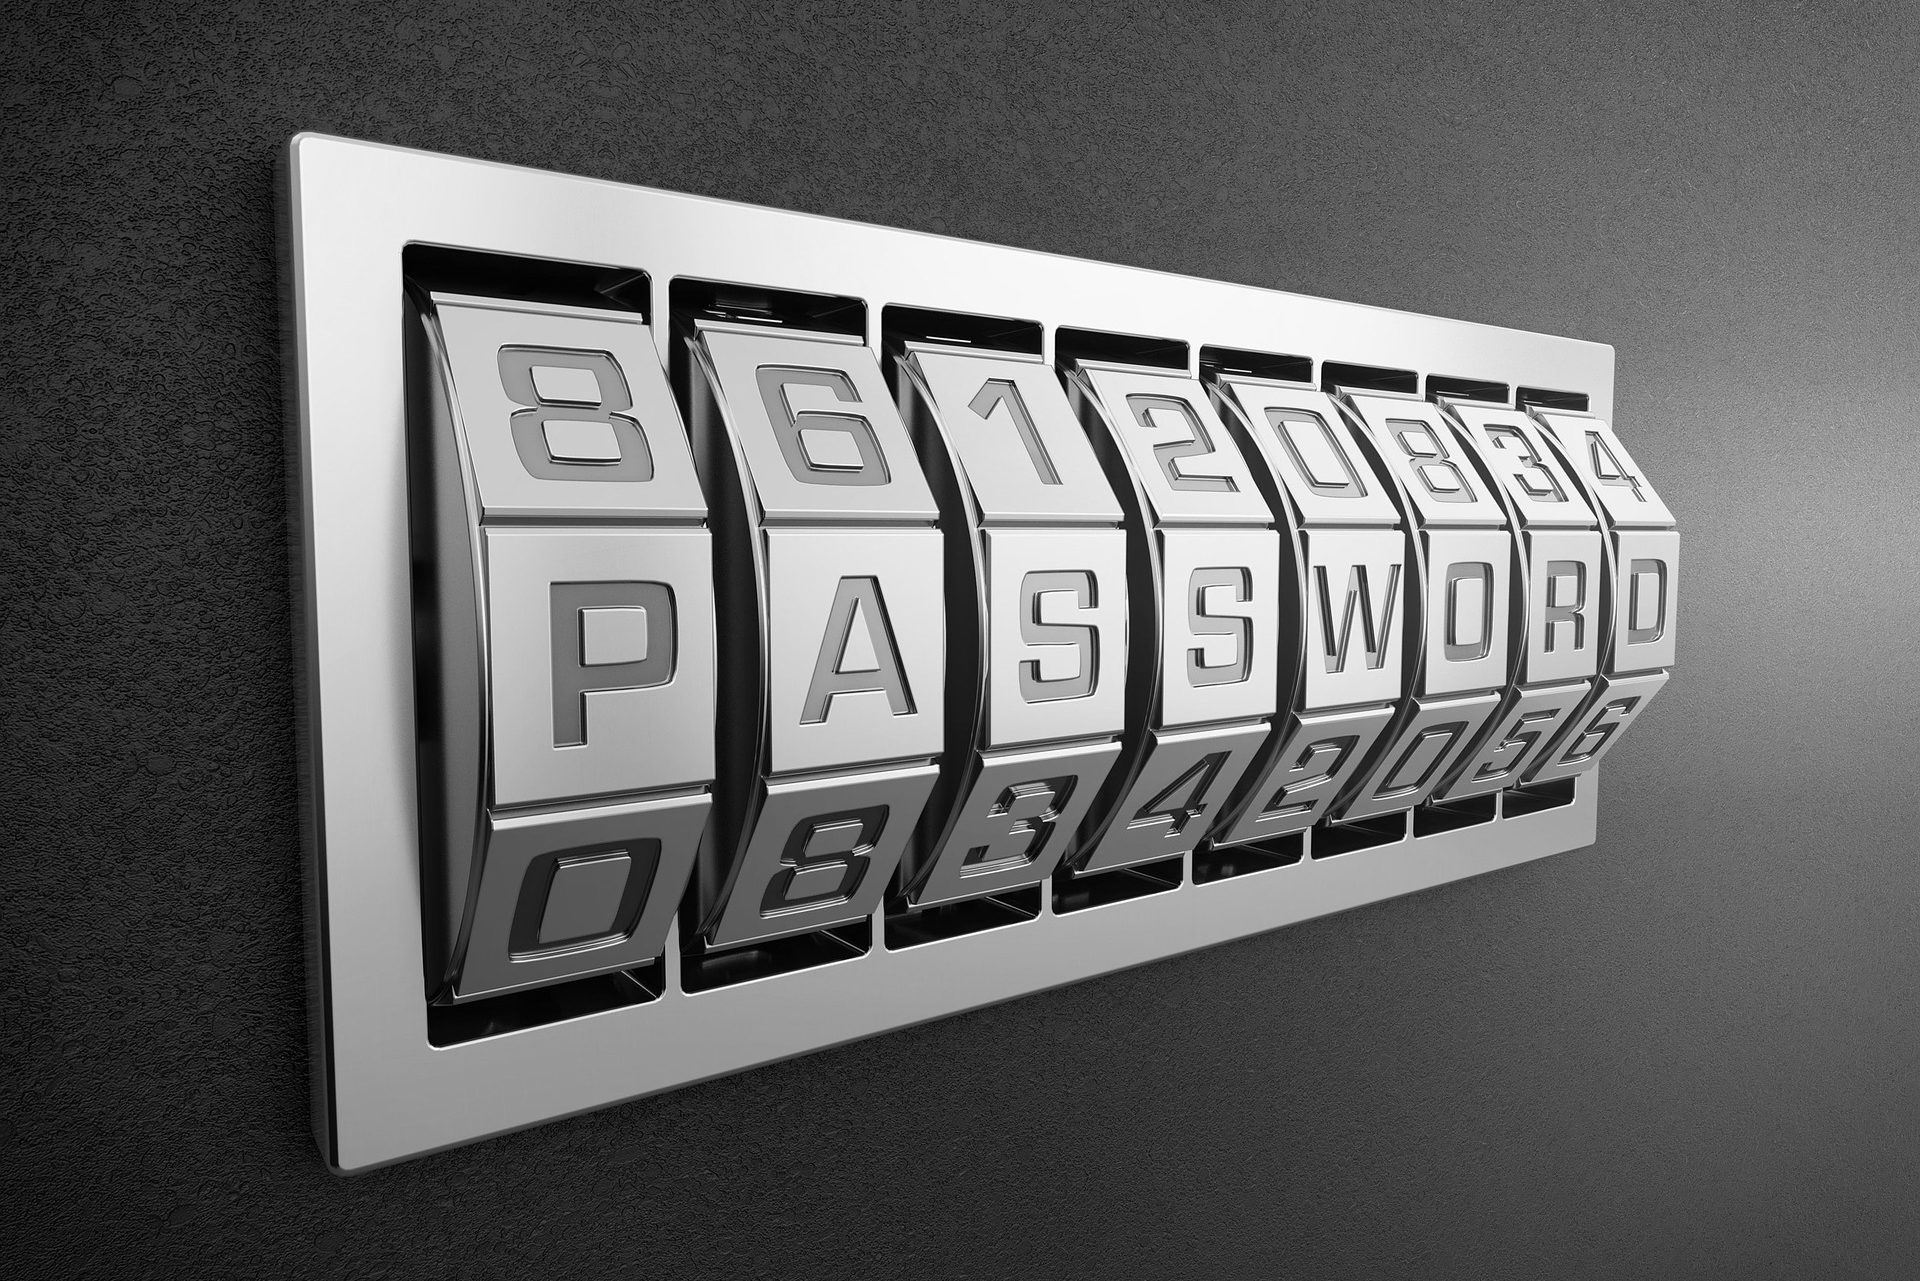 Five Password Misconceptions That Should Be Dispelled